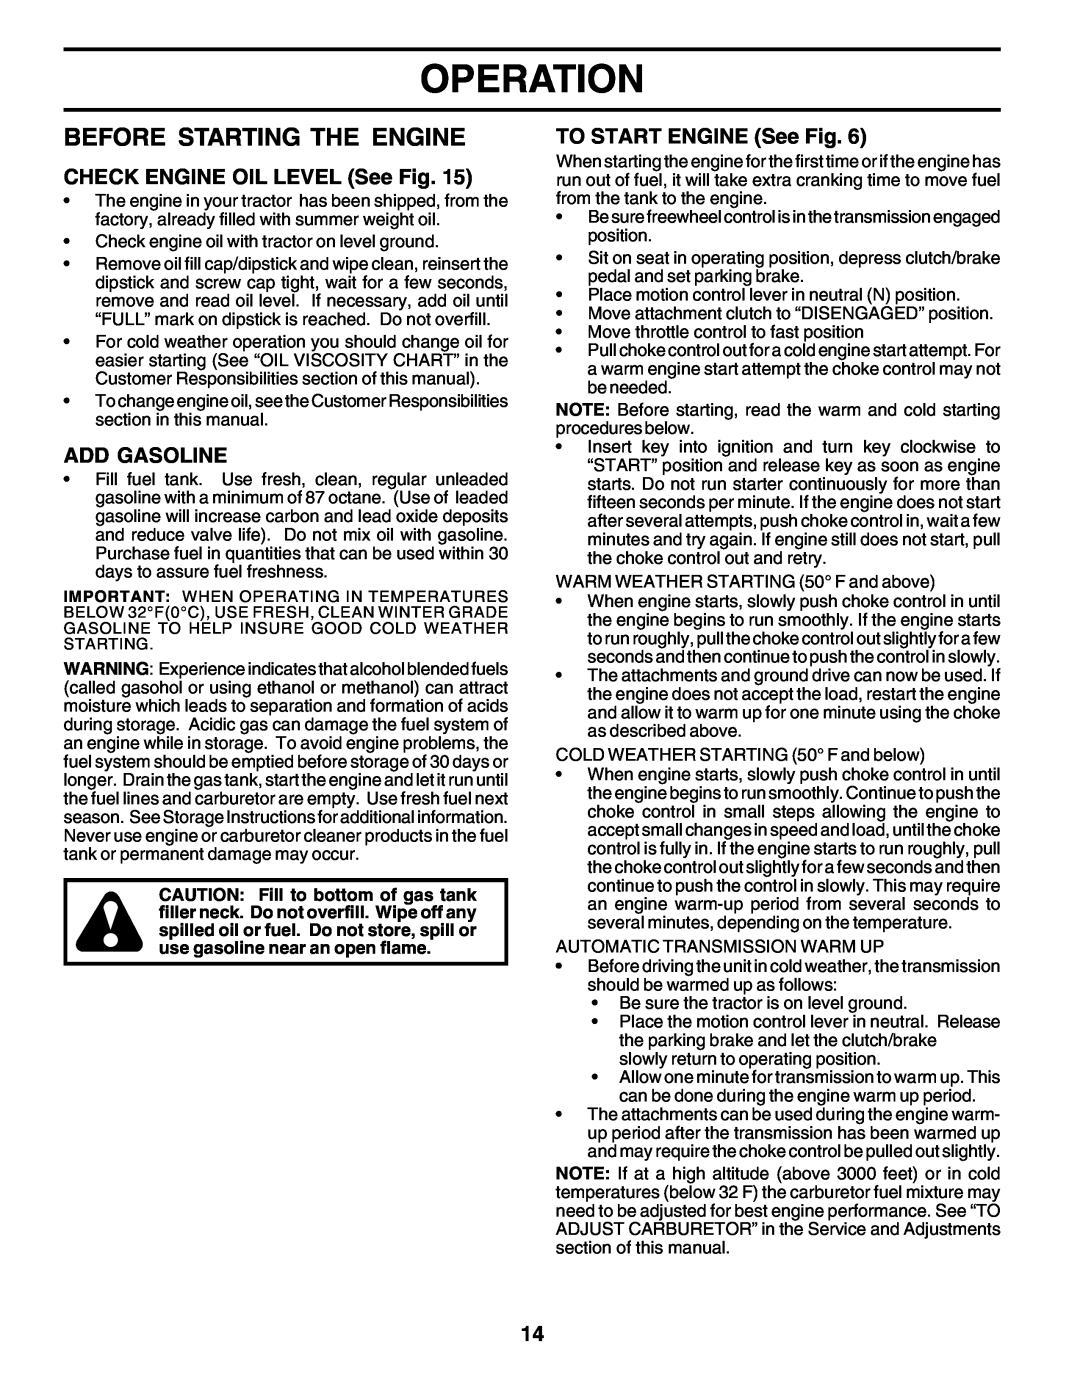 Weed Eater SGT18H46C manual Before Starting The Engine, Operation, CHECK ENGINE OIL LEVEL See Fig, Add Gasoline 